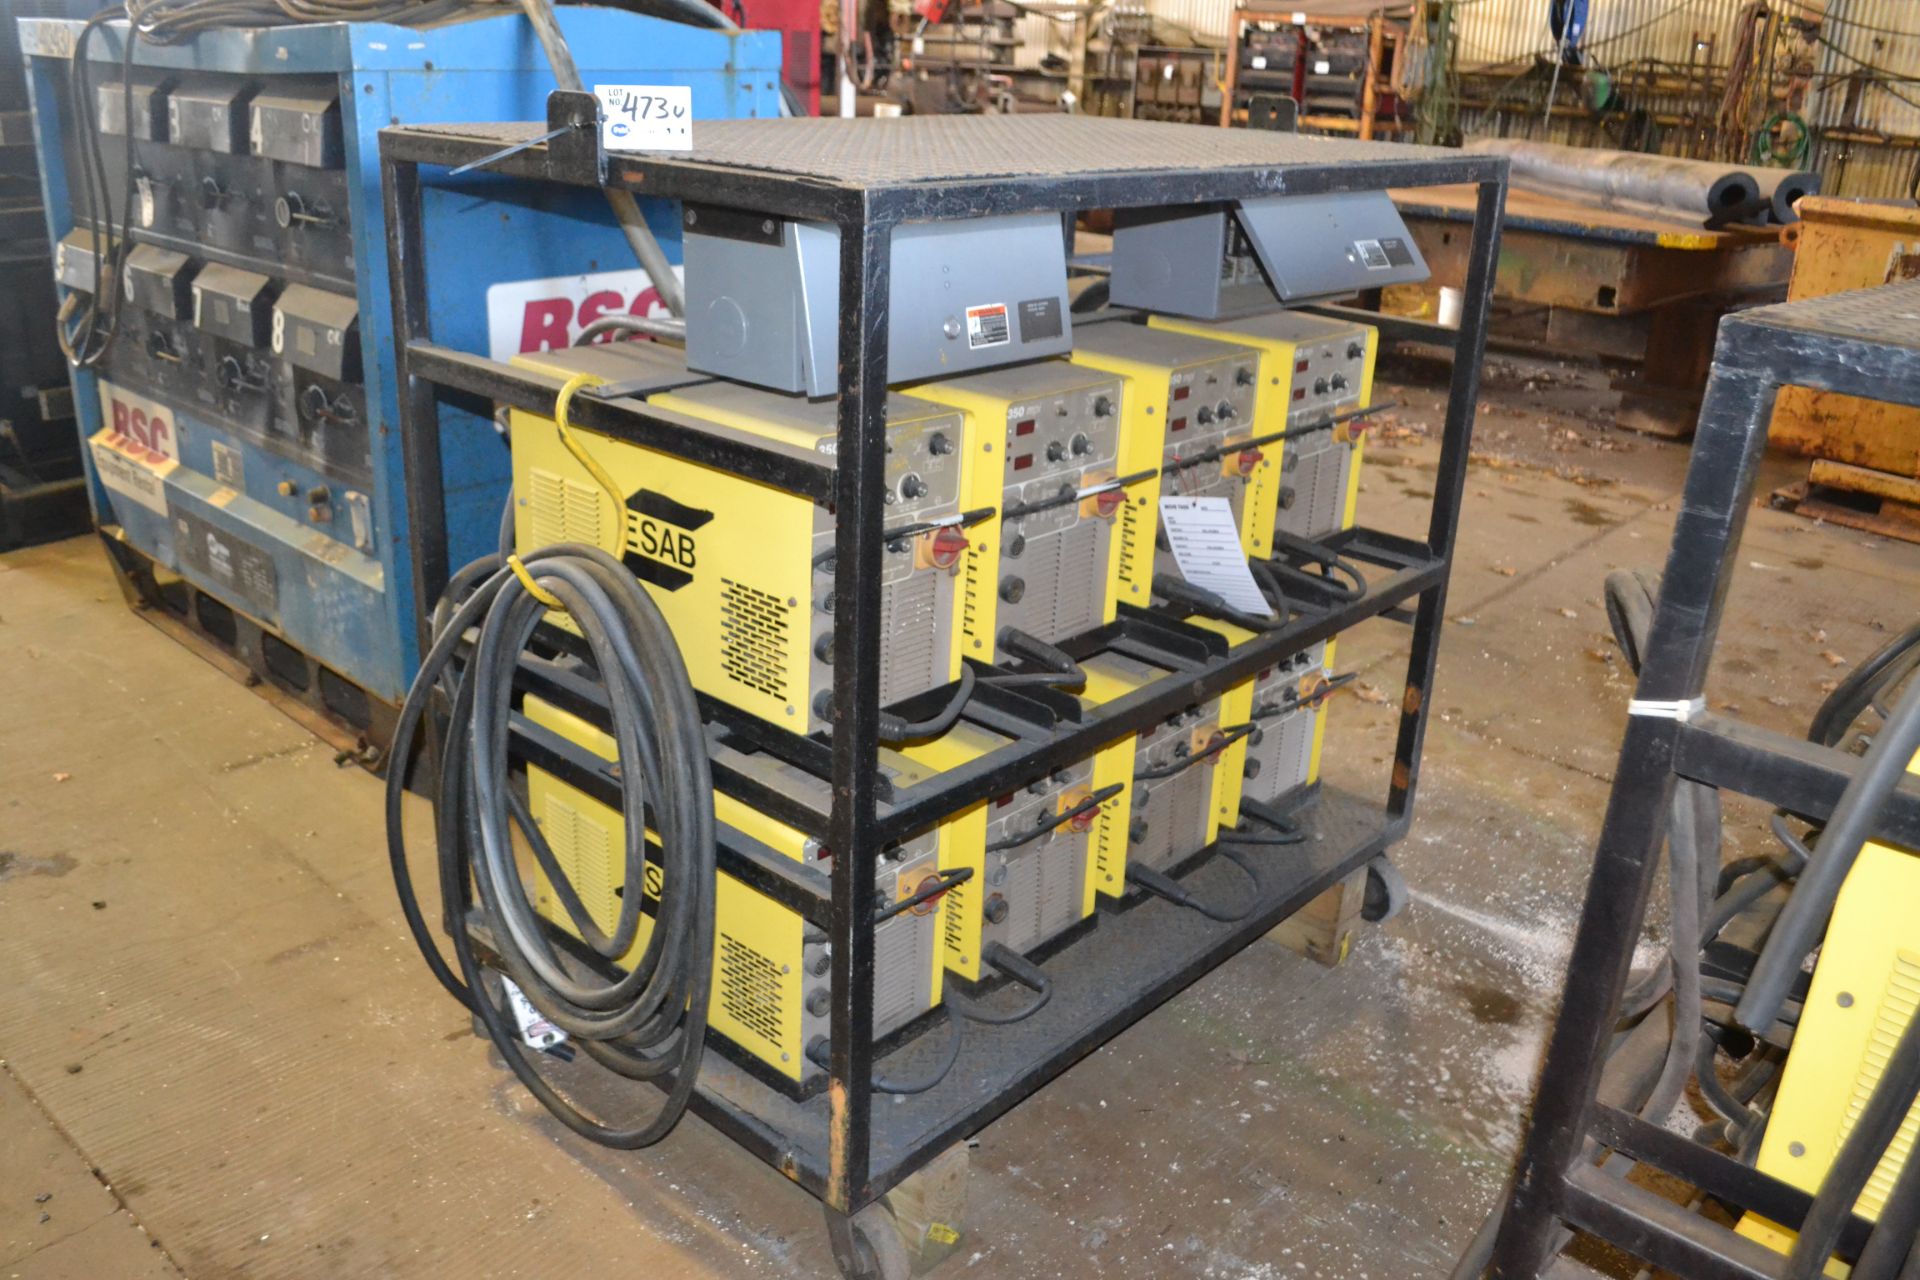 (8) Esab 350 MPI Welders with Breaker Boxes on Steel Cart with Casters